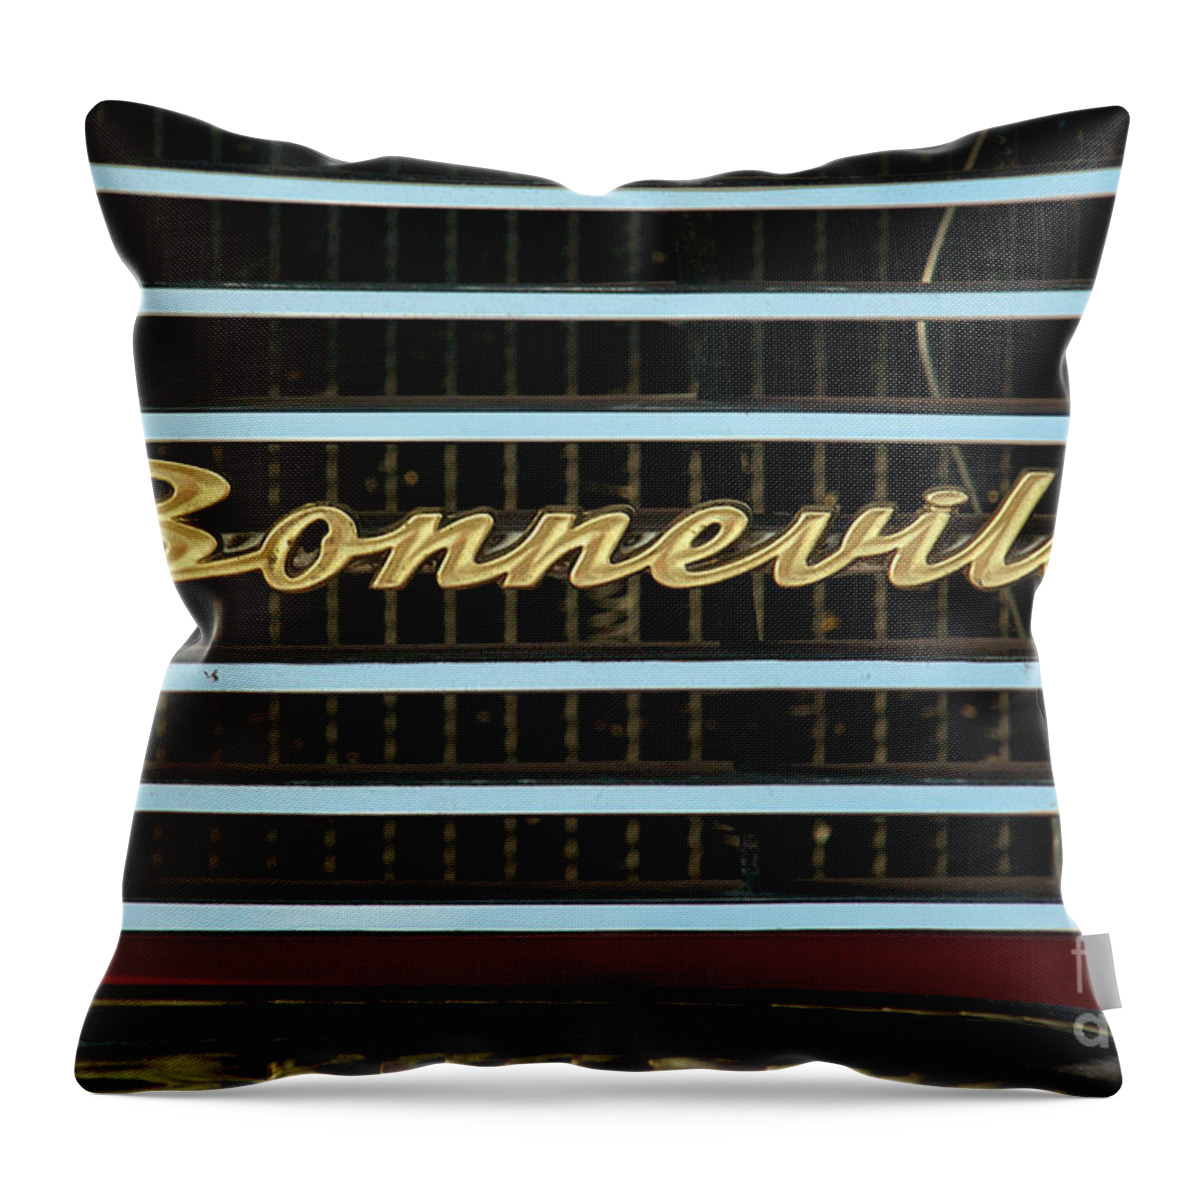 4th Annual Throw Pillow featuring the photograph 1960 Pontiac Belvedere Logo by Mark Dodd